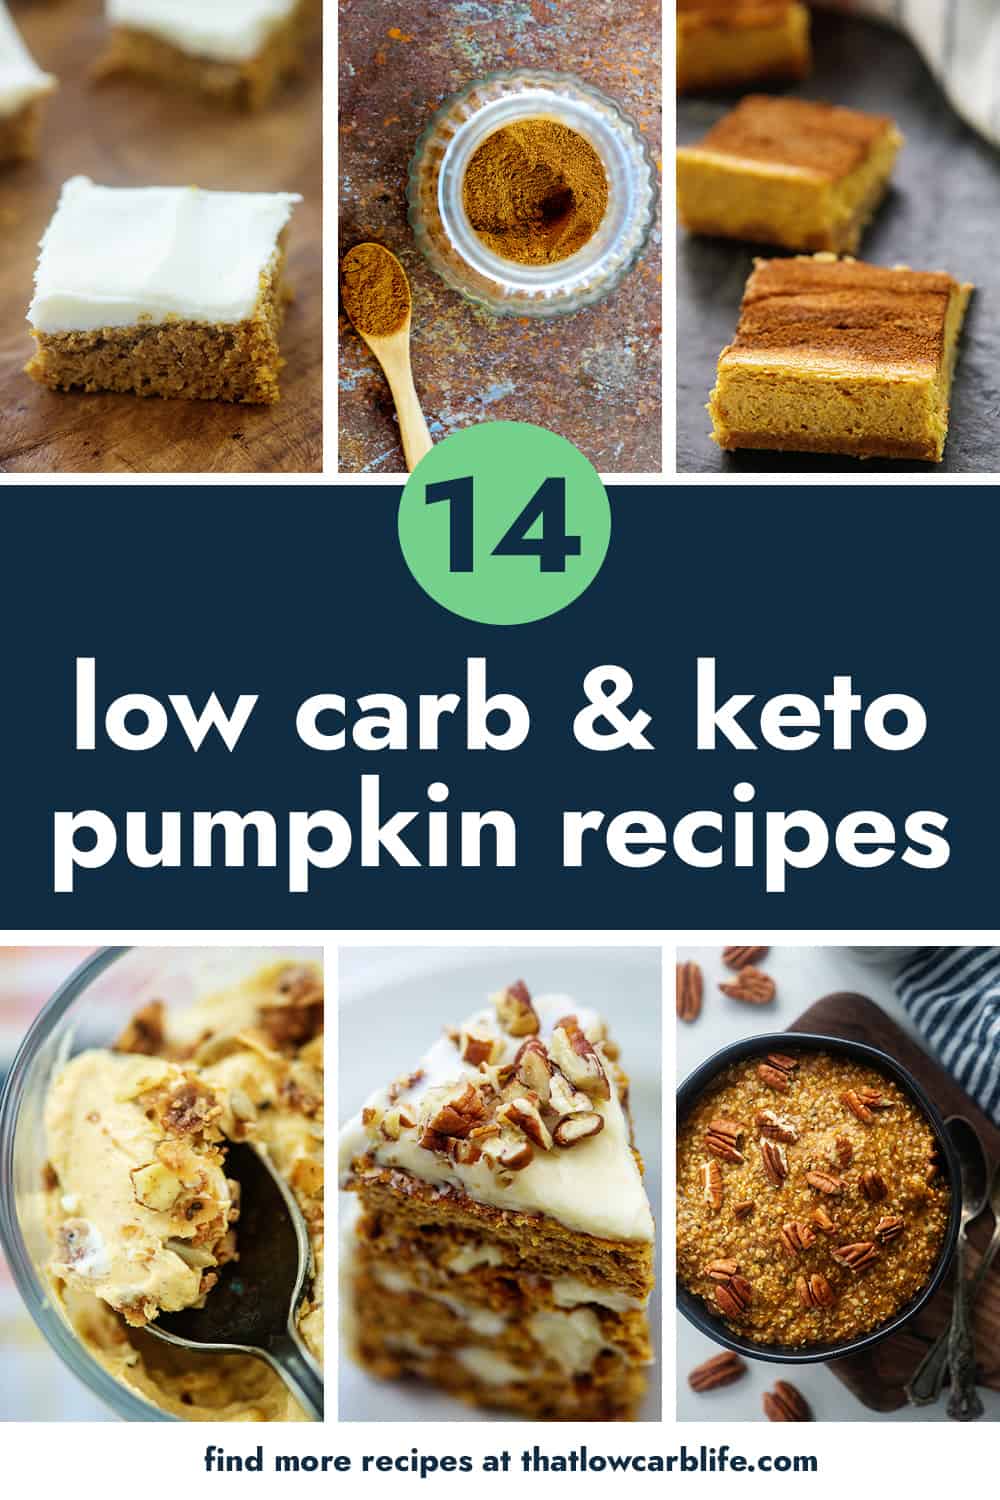 Collage of keto pumpkin recipes images.